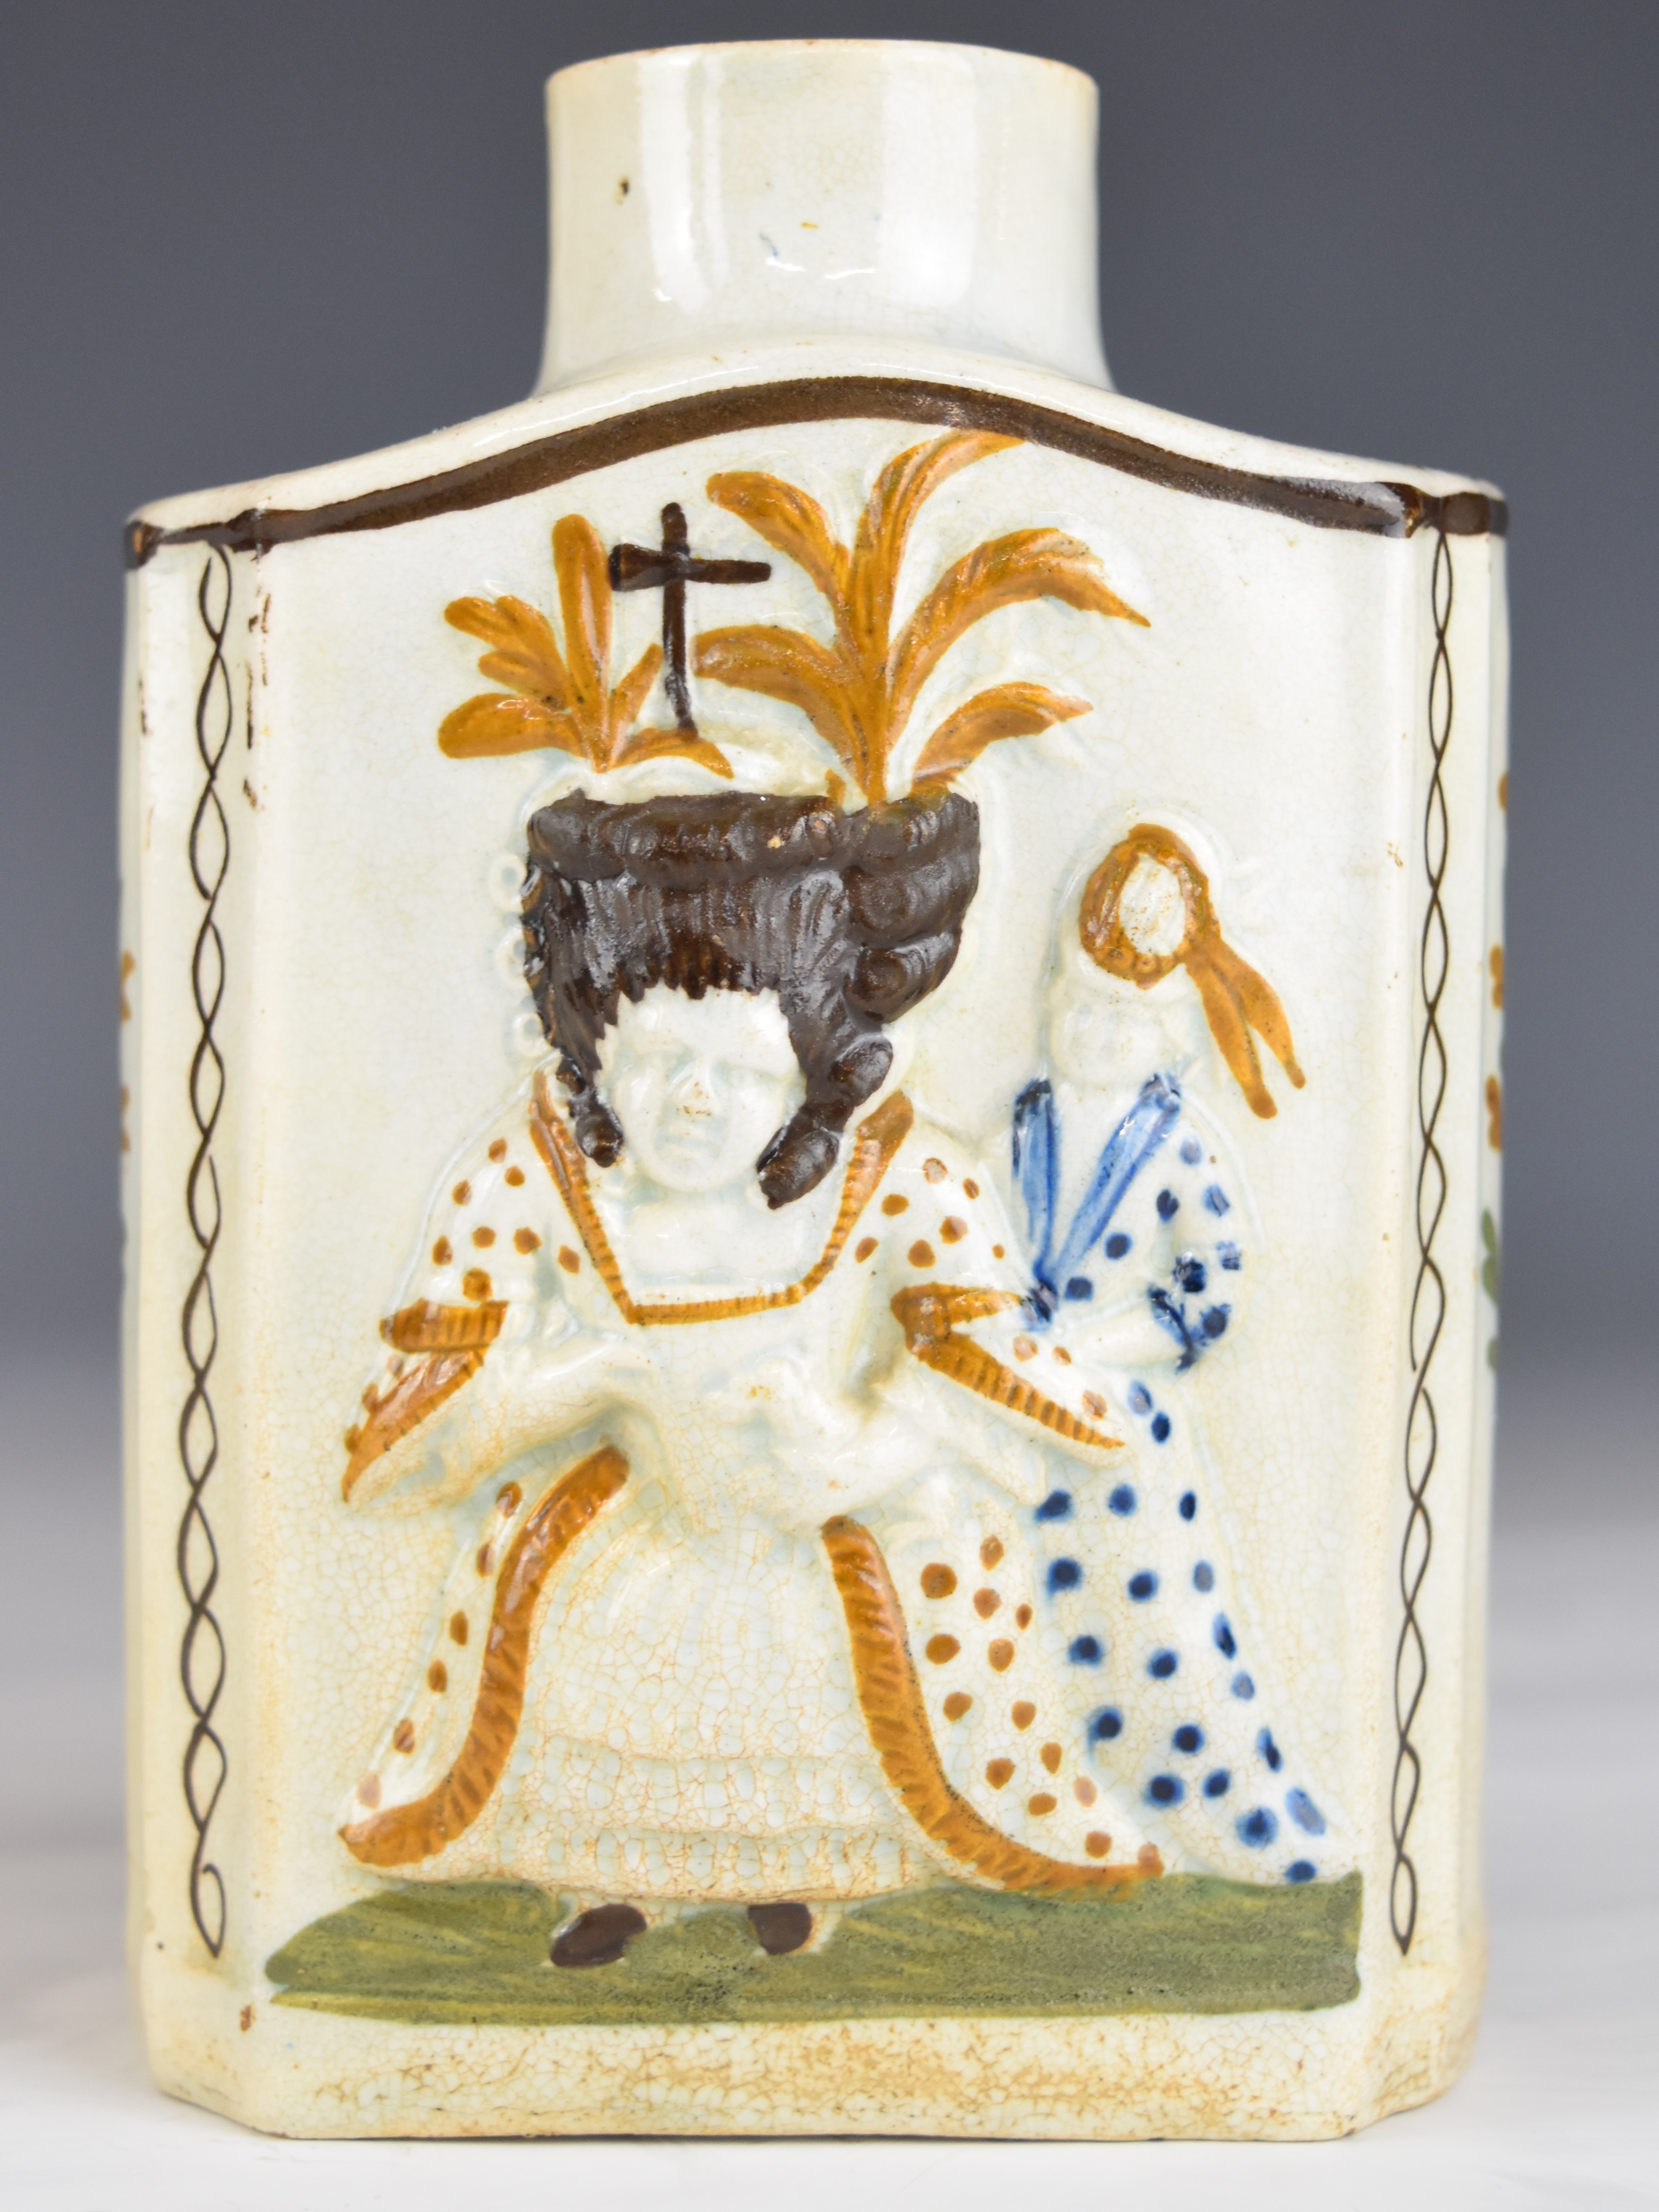 A late 18thC Prattware tea caddy with relief decoration of figures, probably King George III and - Image 2 of 5